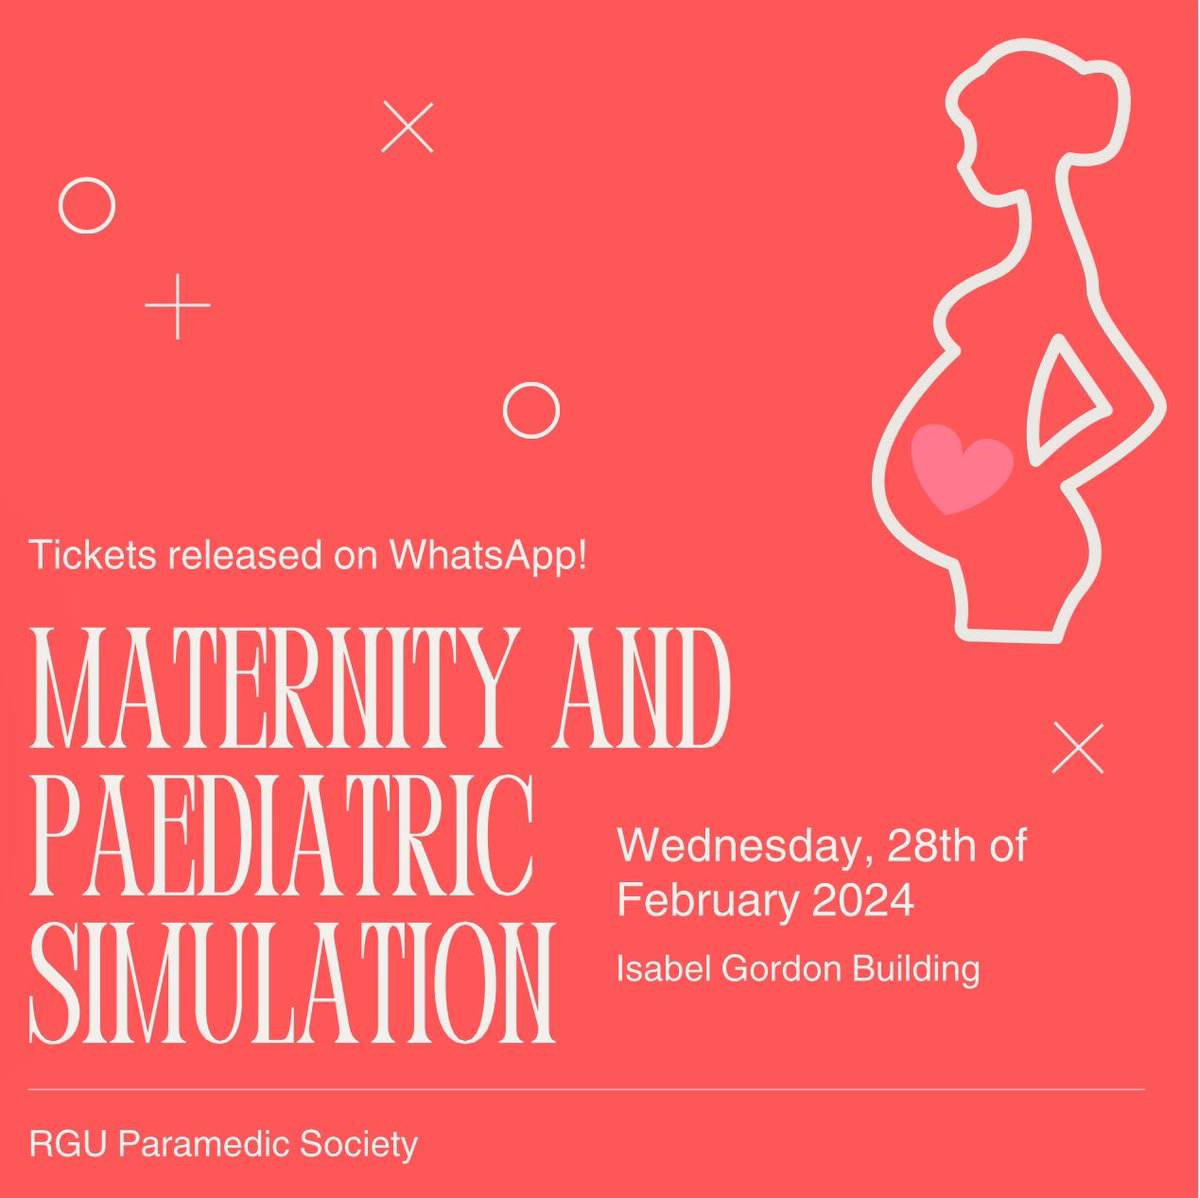 We are so excited to be running another simulation event - this time with the theme of Maternity and Paediatrics🤰🏼👨🏻‍🍼✨ Tickets and more info to be released on WhatsApp!